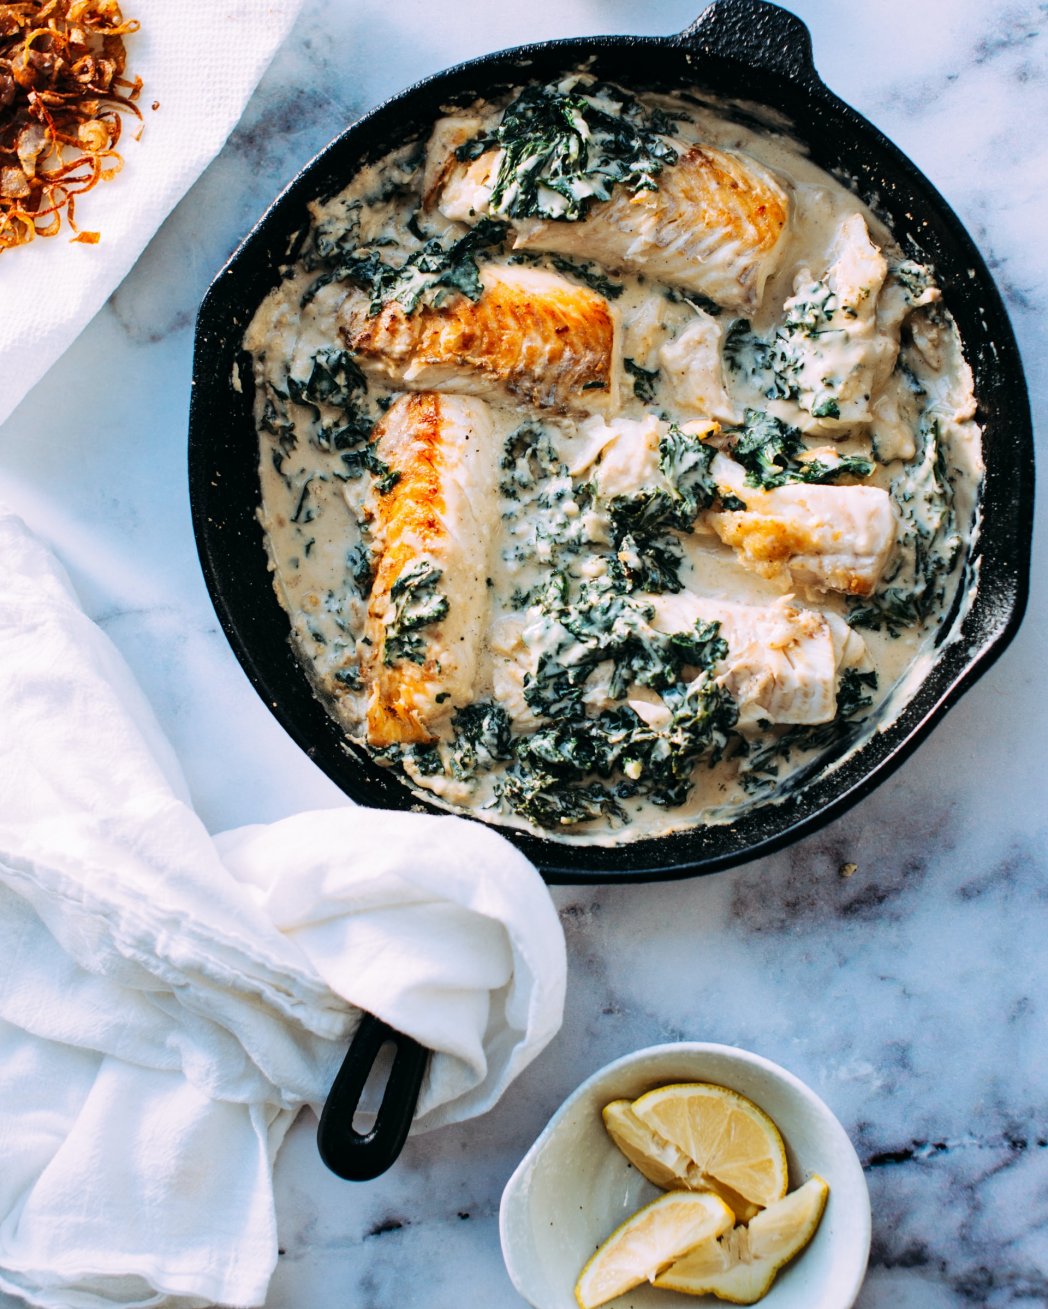 Grilled pikeperch with creamy spinach